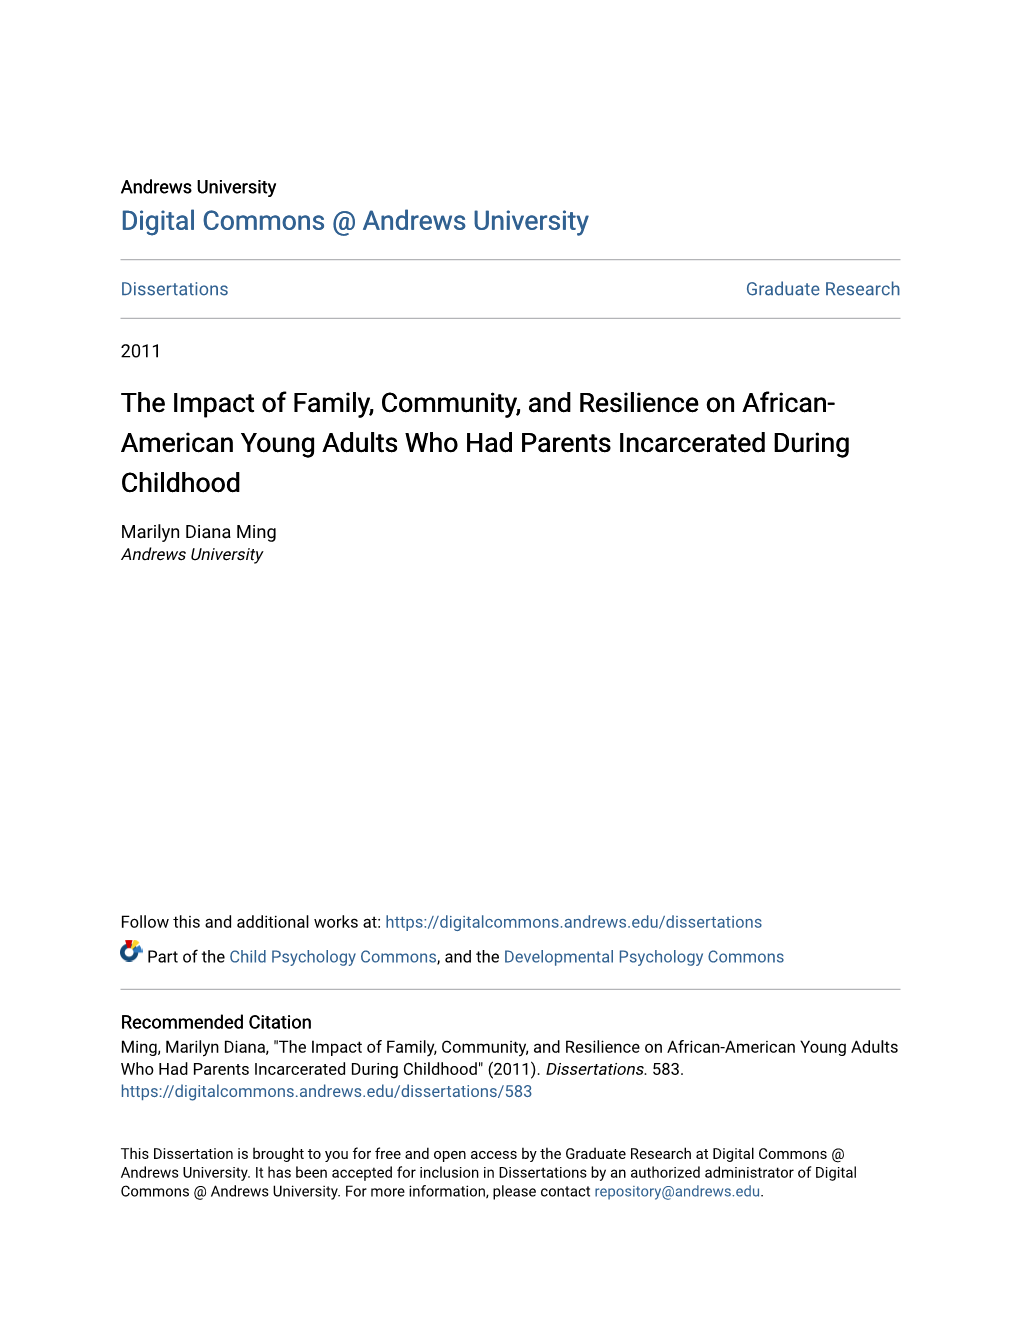 The Impact of Family, Community, and Resilience on African-American Young Adults Who Had Parents Incarcerated During Childhood" (2011)